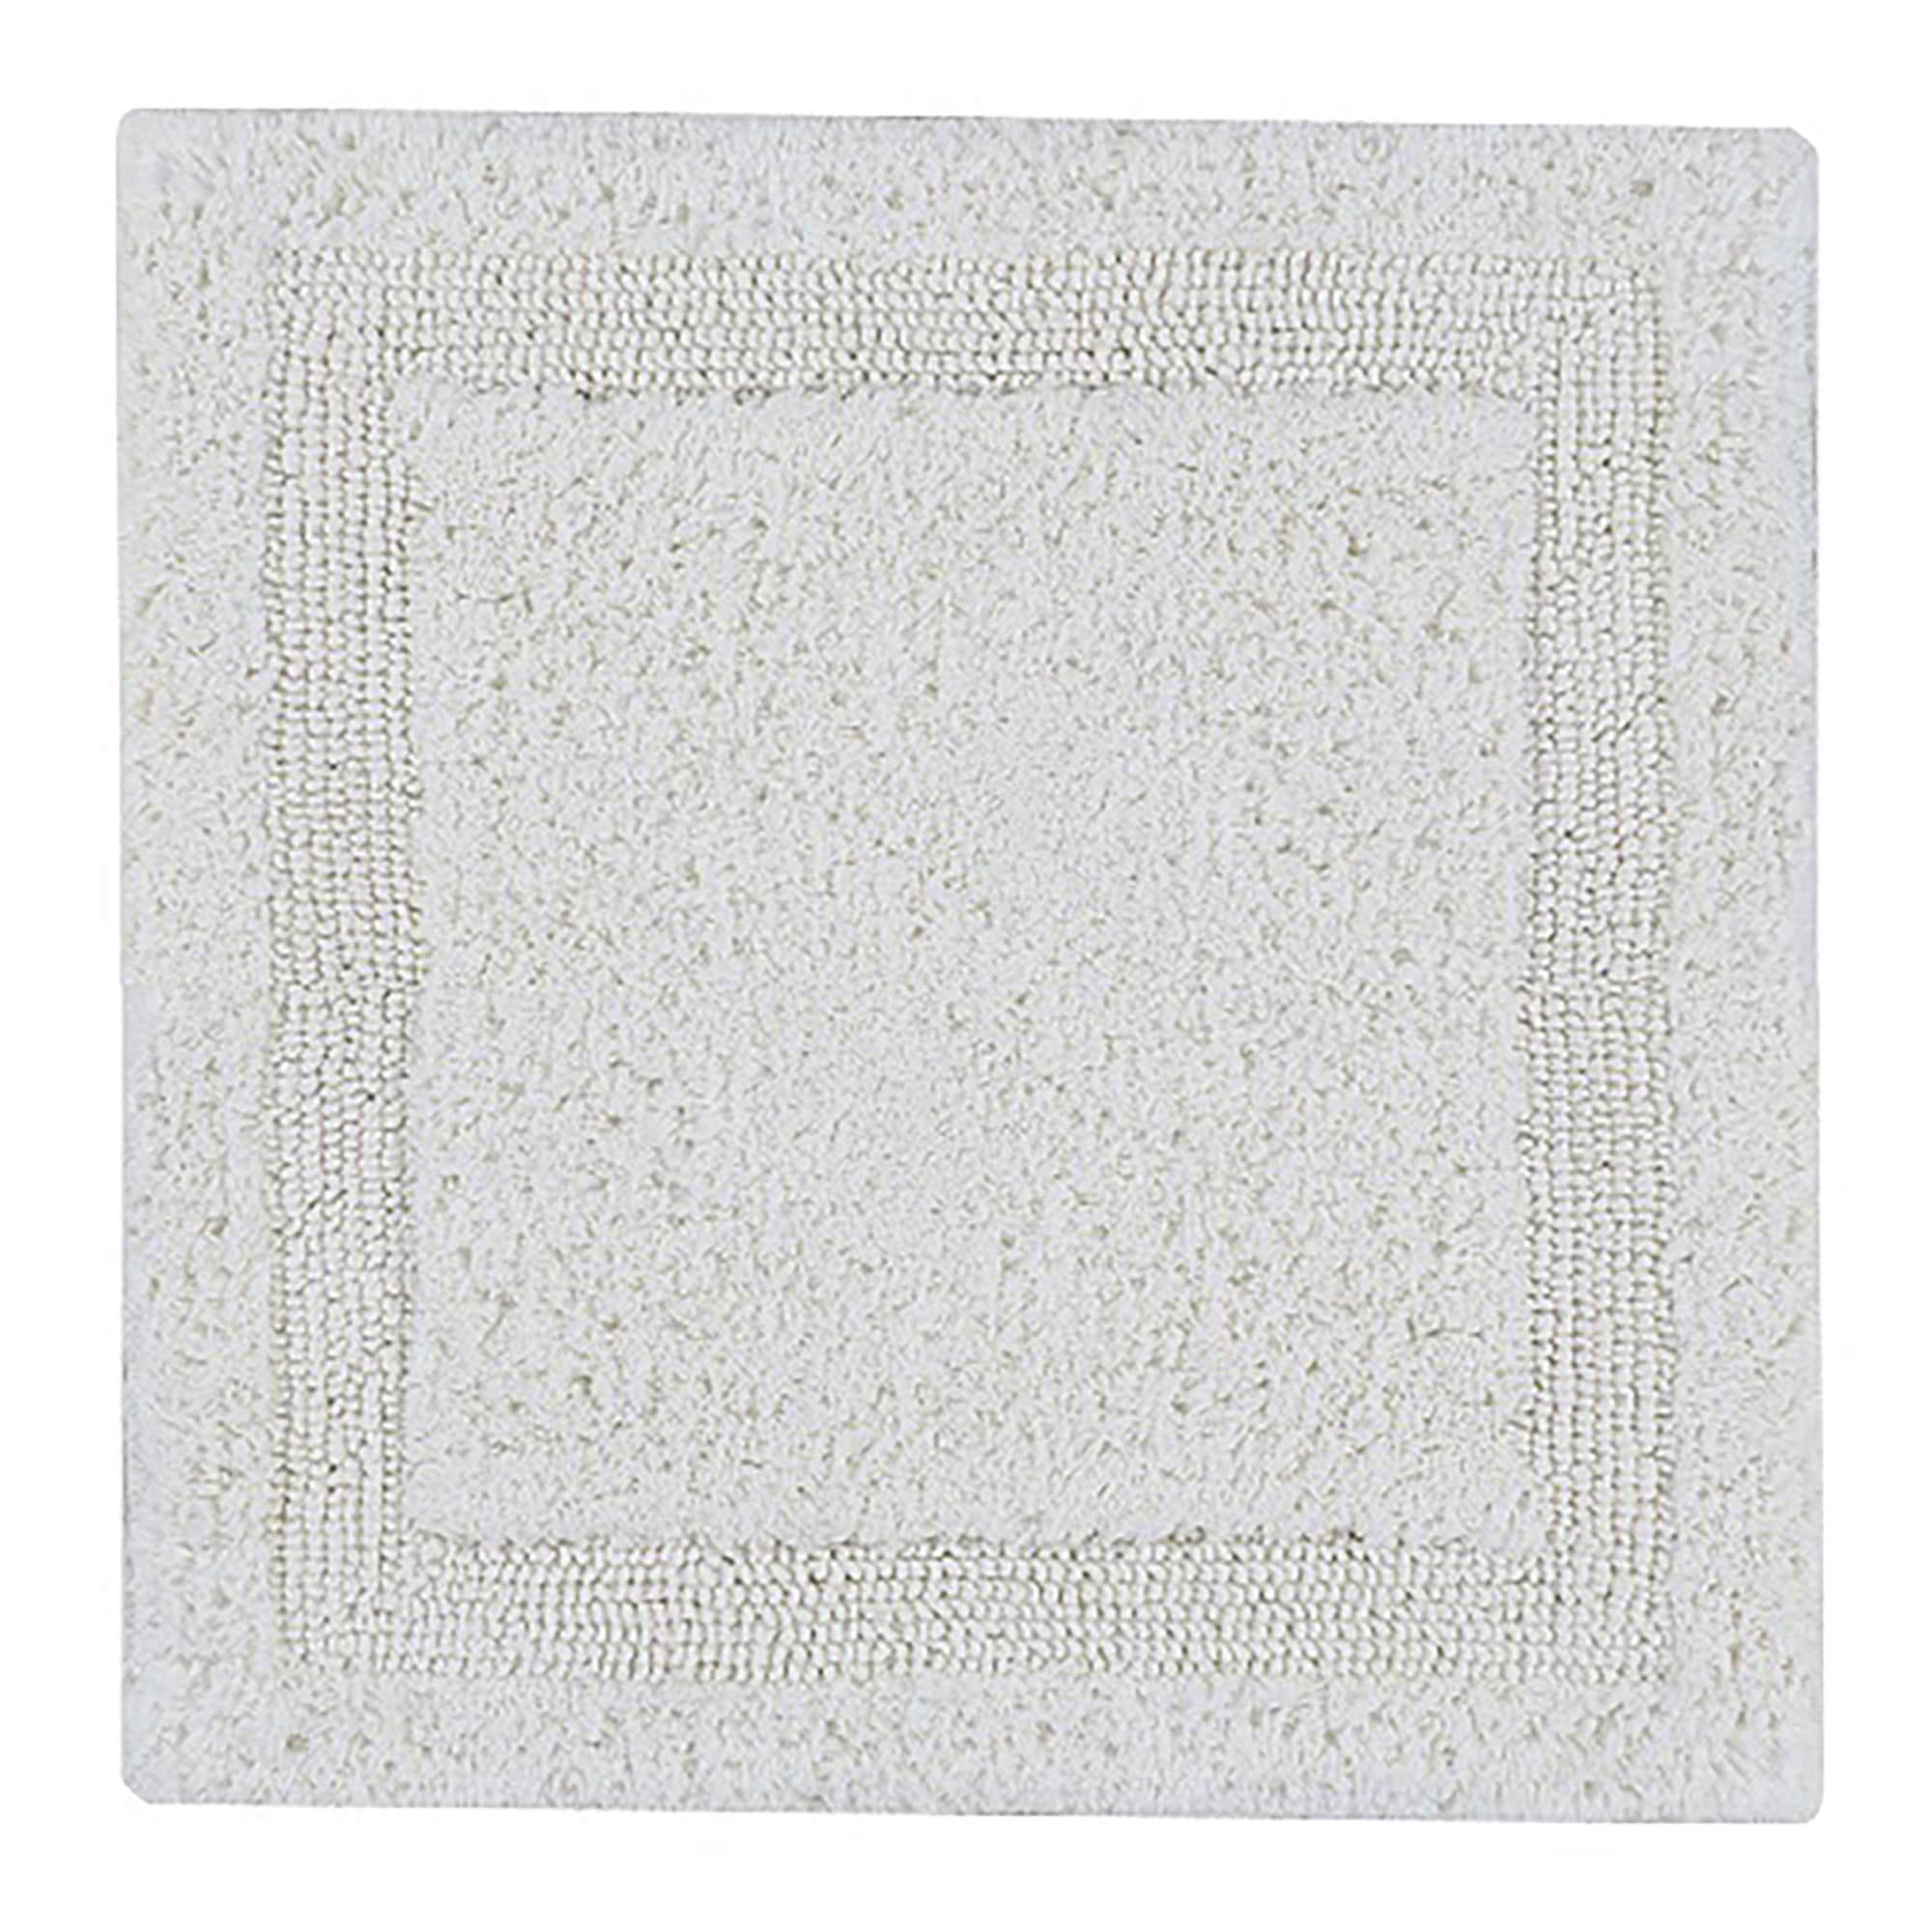 White 36 X 48 100% Cotton Tufted Bath Rug Mat Made in Italy 90 x